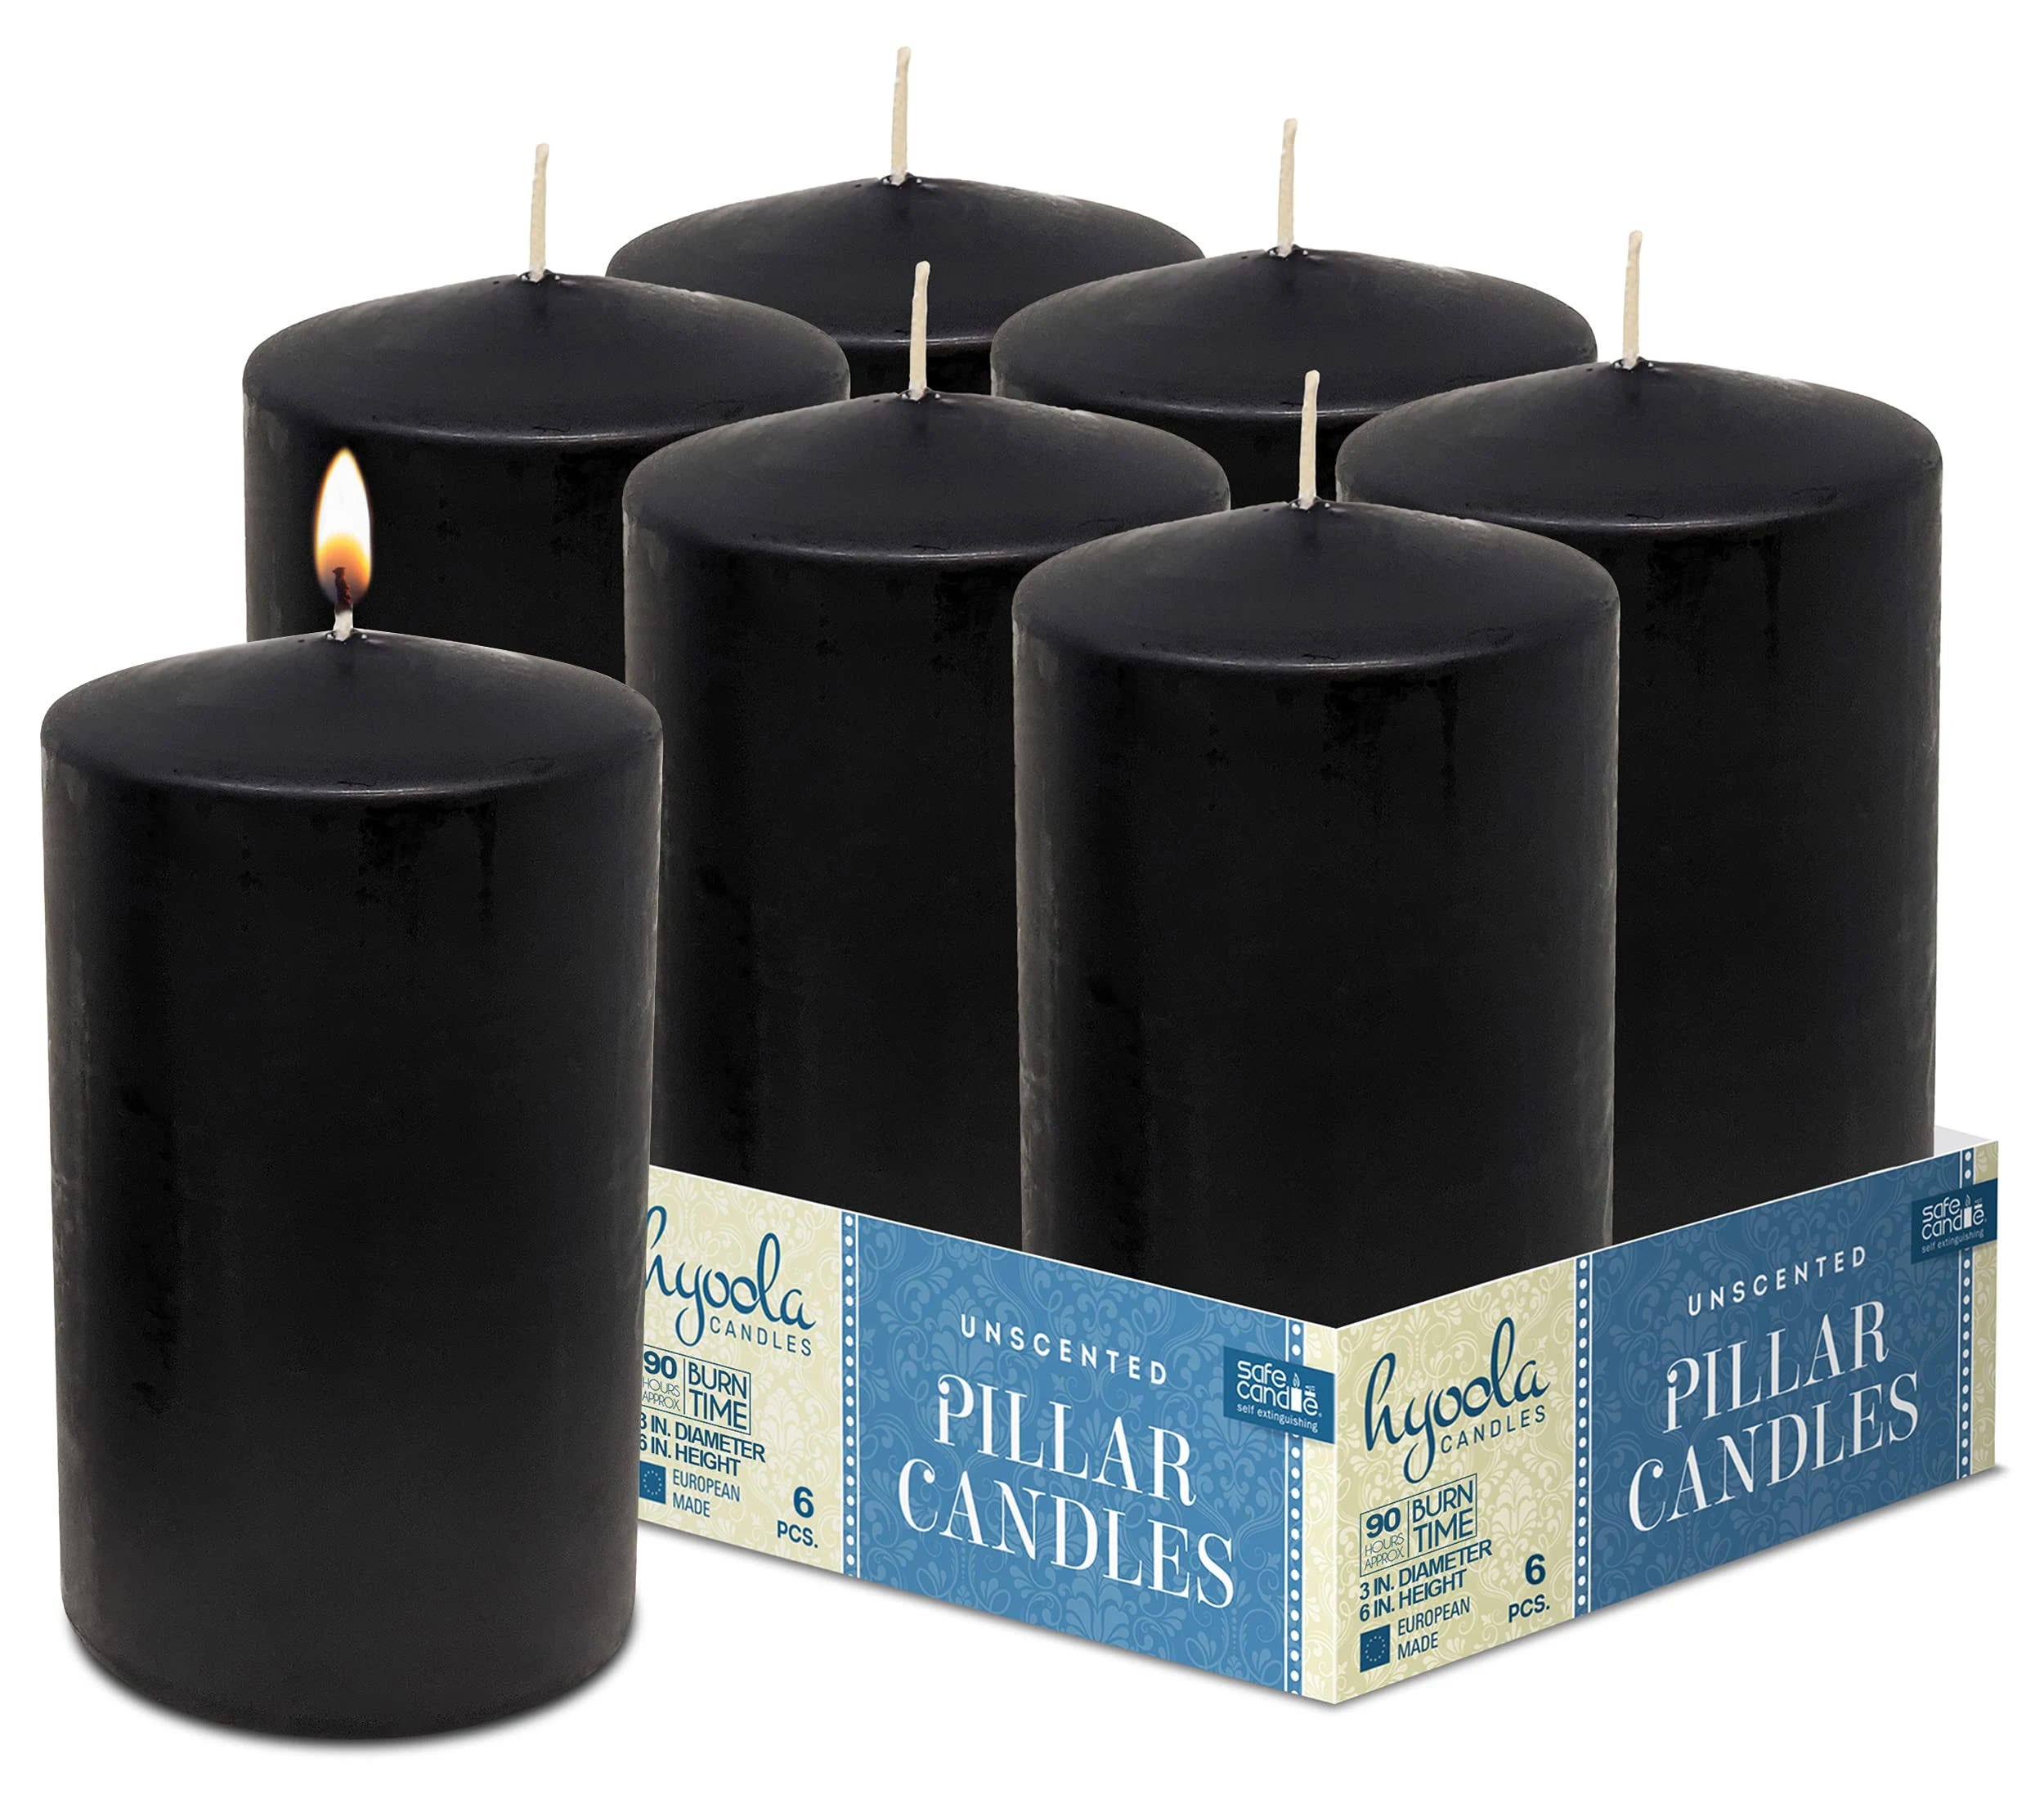 Black Pillar Candles: 6-Pack Unscented Pillar Candles for Unblemished Flame and a Cozy Ambiance | Image